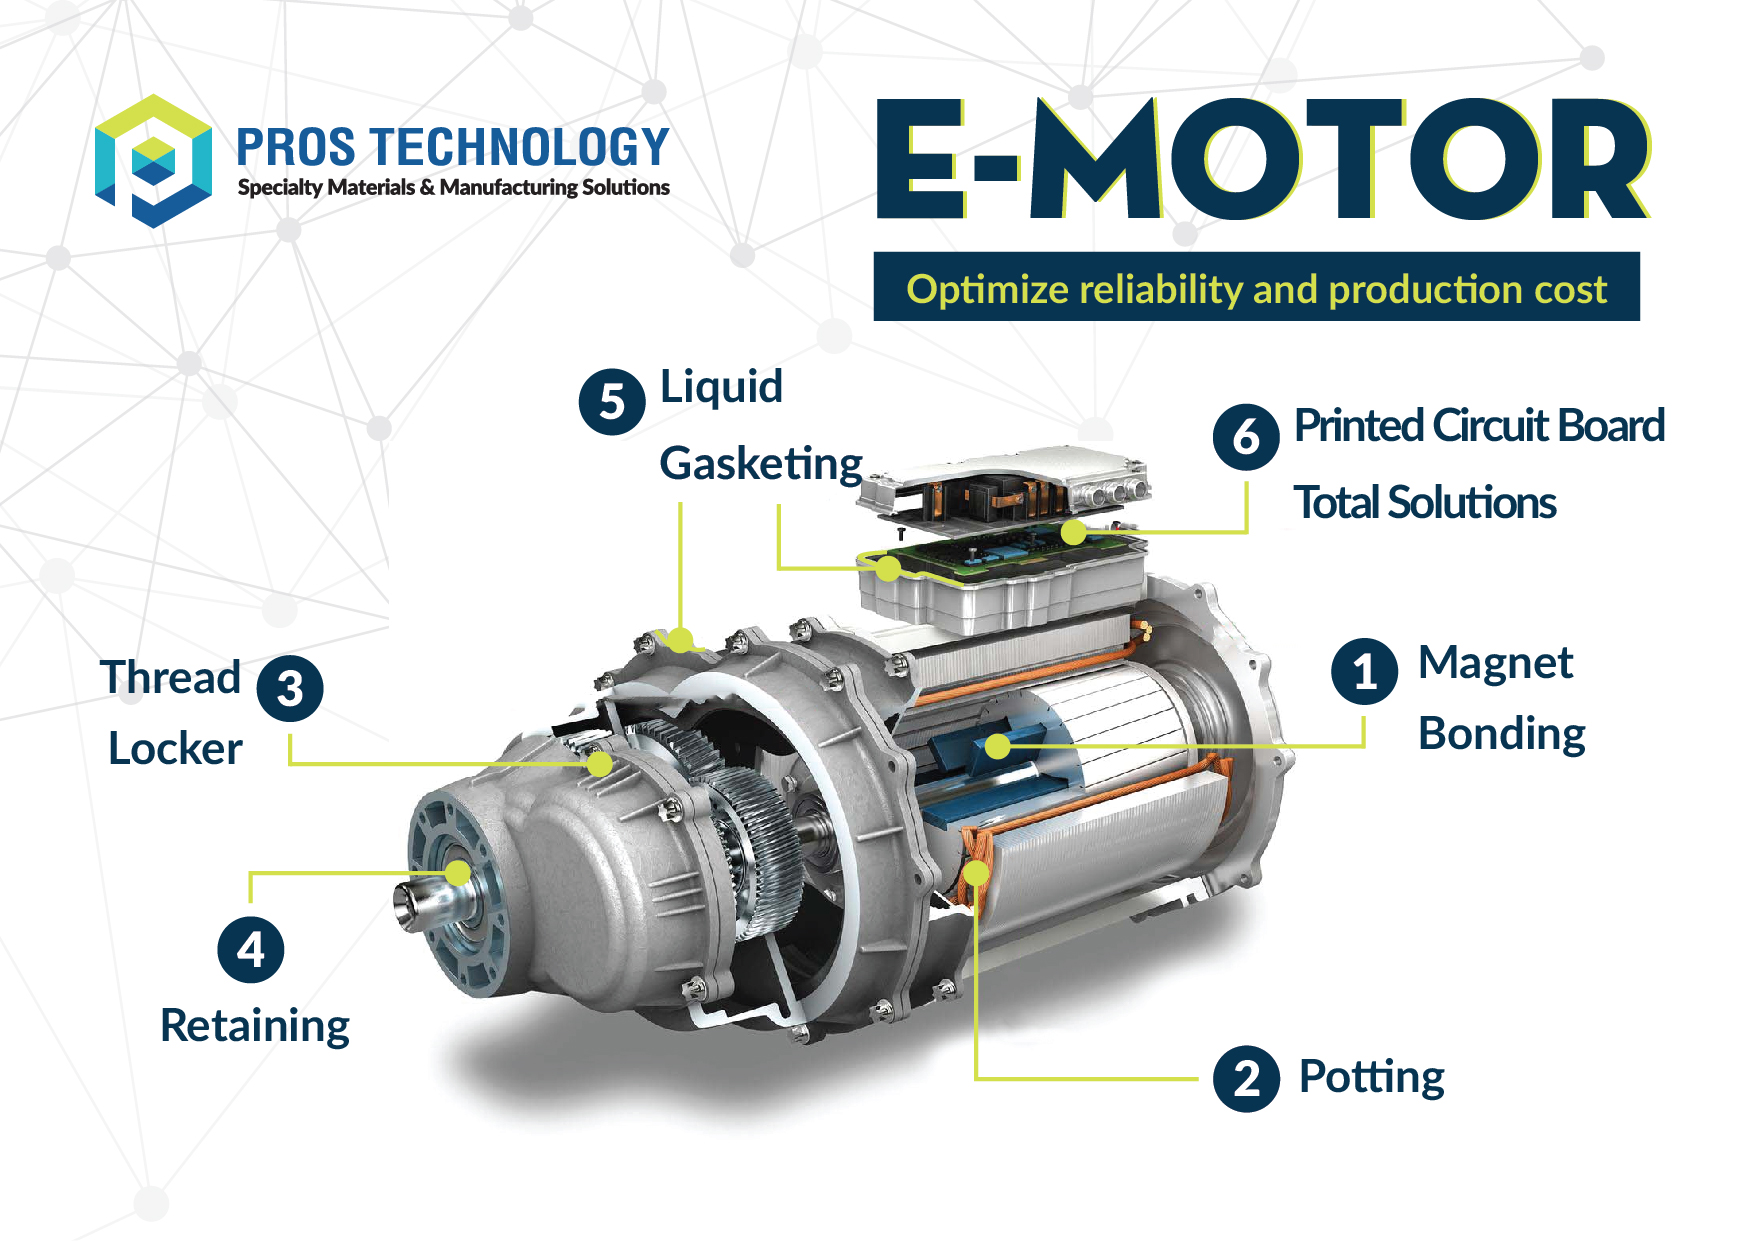 Electric Motors – Total Solutions to optimize reliability and